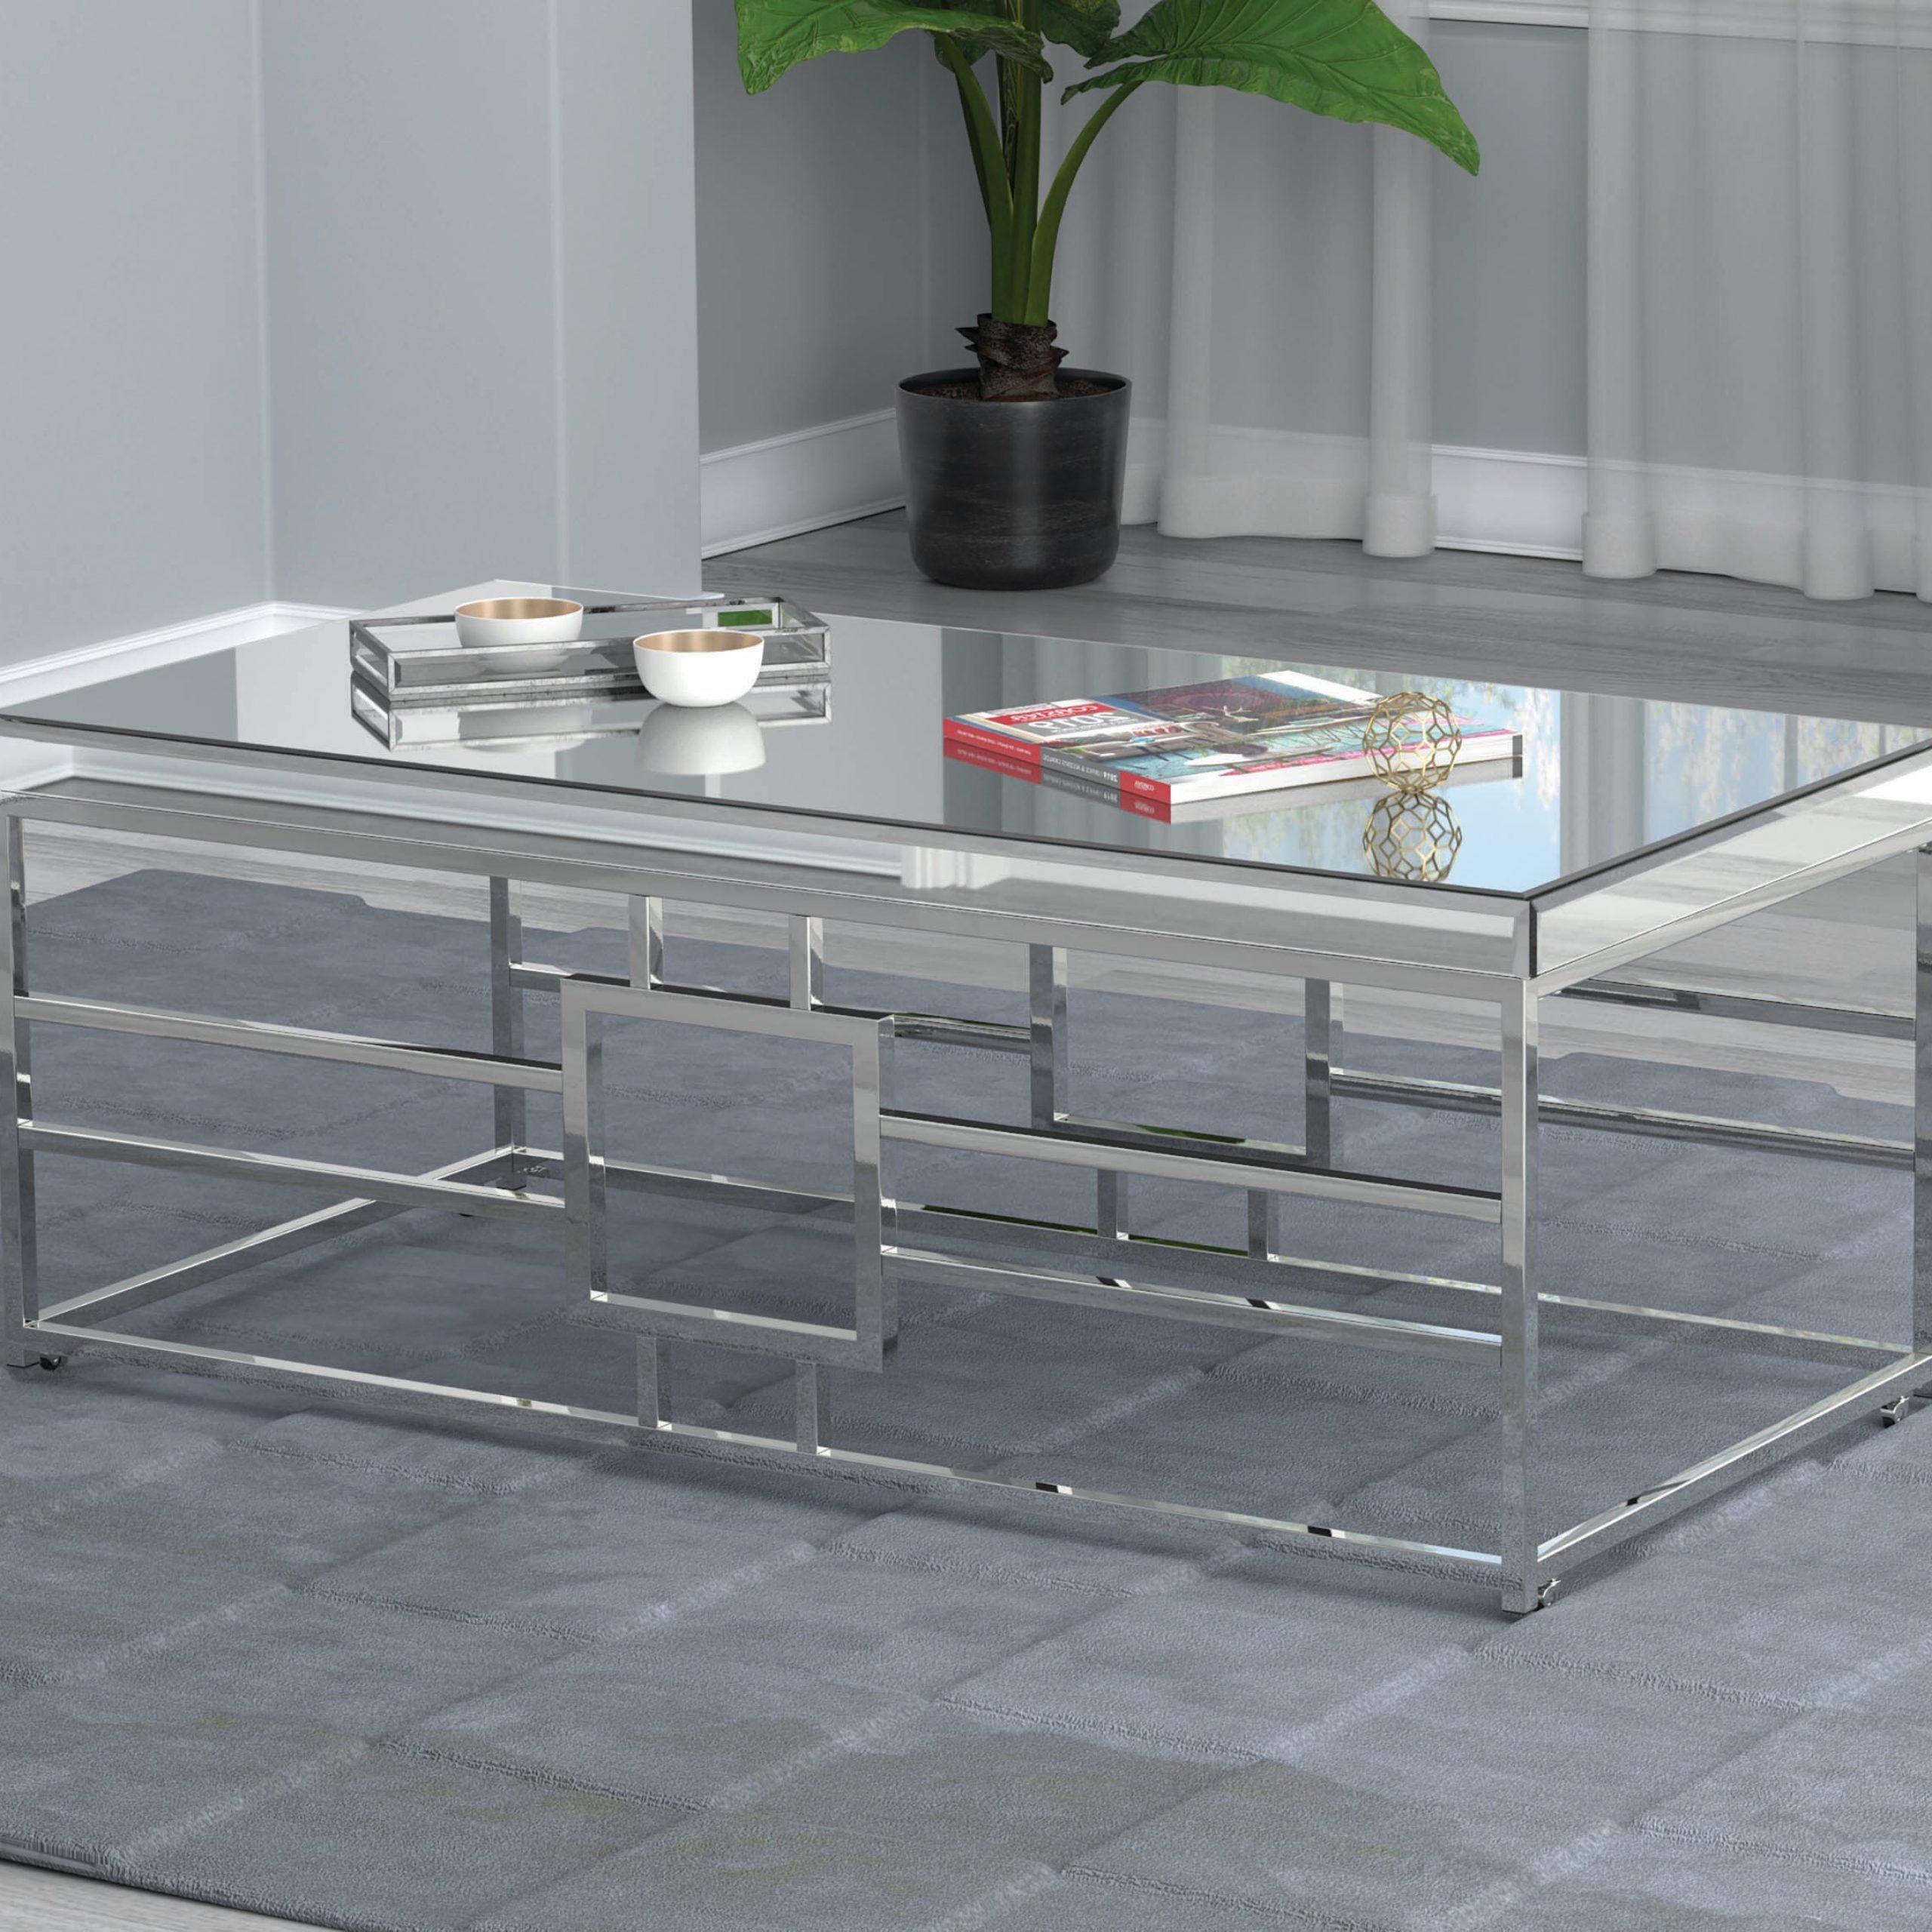 Orren Ellis Rectangular Coffee Table With Casters Mirror And Chrome |  Wayfair Within Chrome Coffee Tables (Gallery 19 of 20)